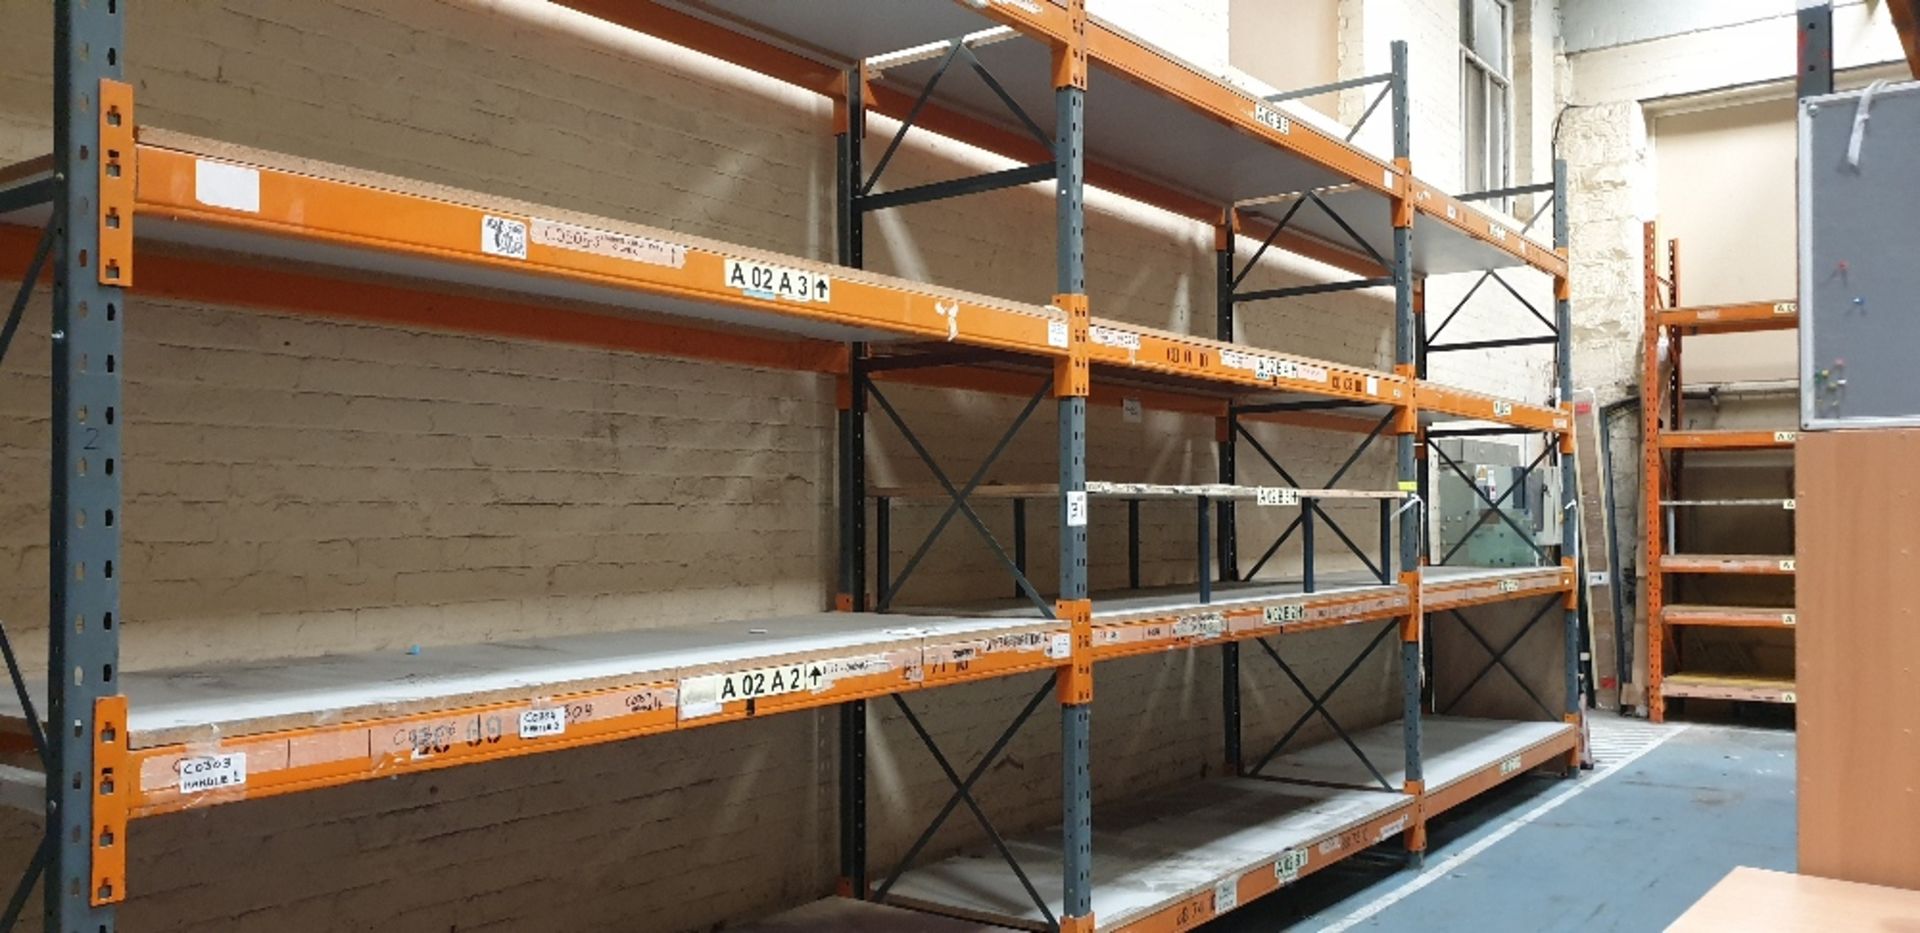 3 - bays of heavy duty pallet racking with 25mm chipboard shelving